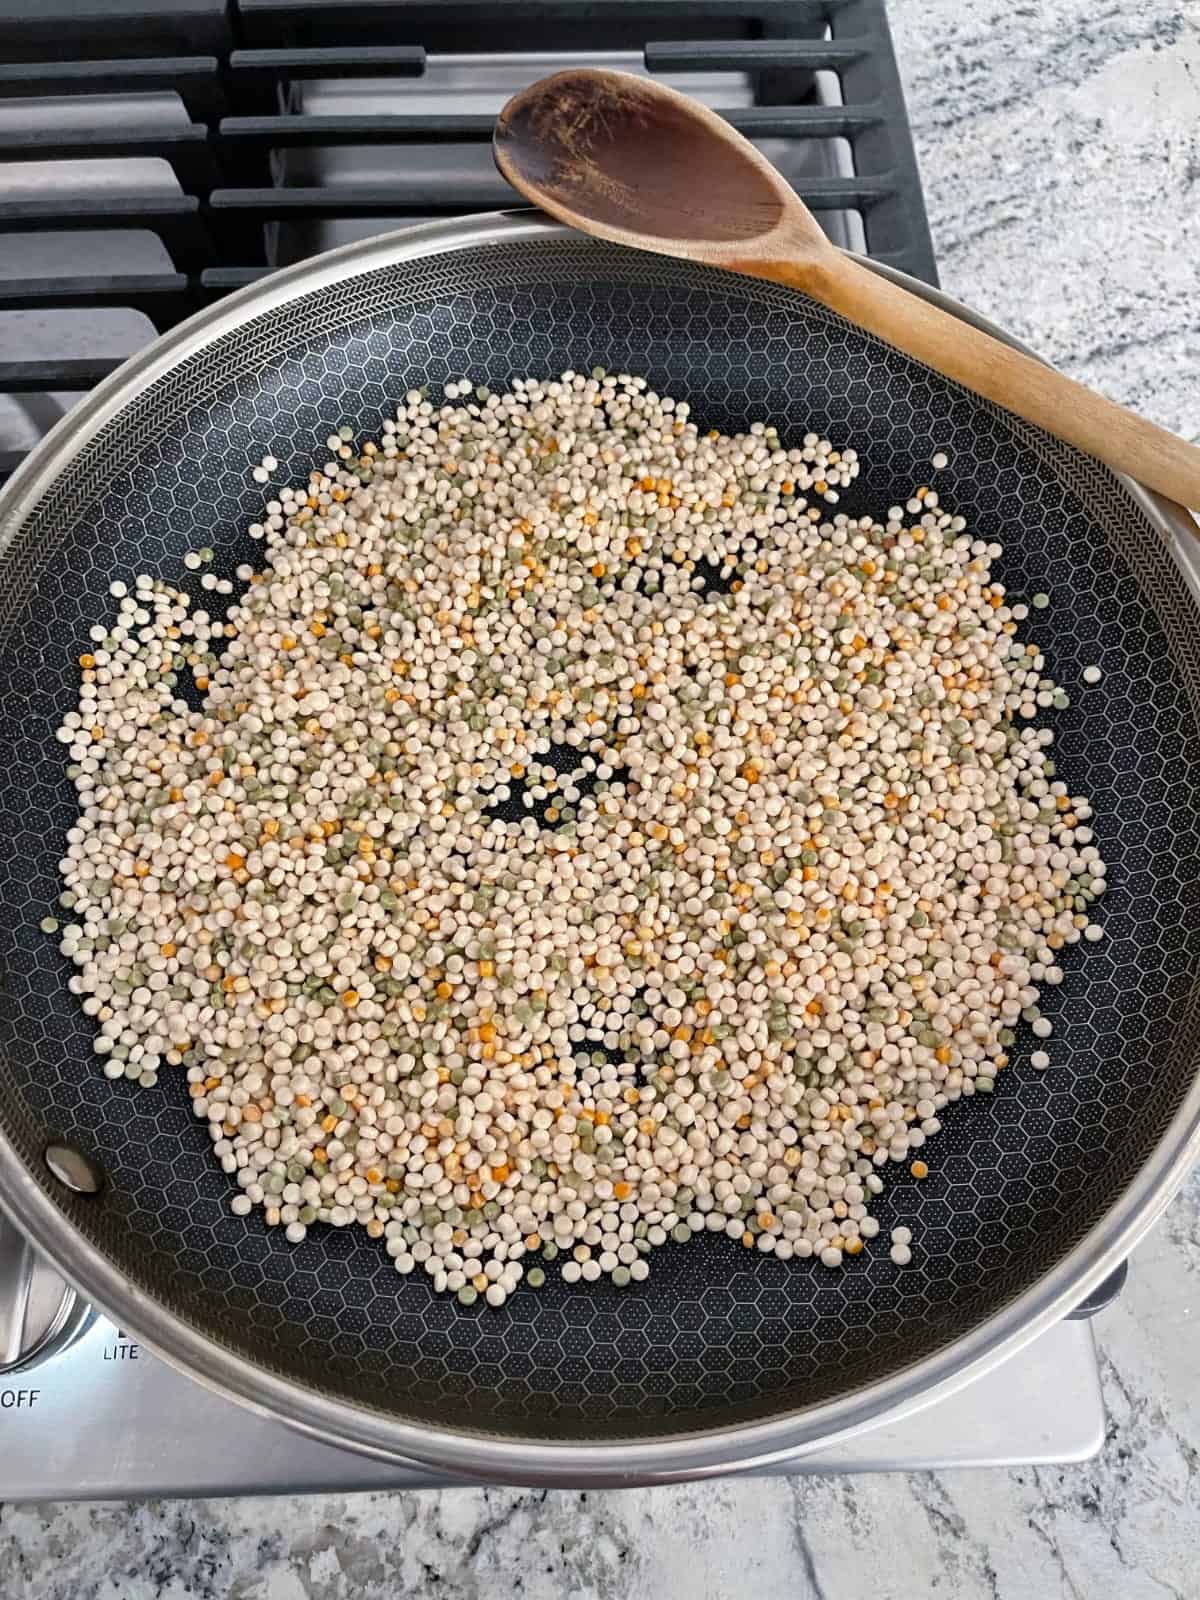 Toasting Israeli couscous in large skillet.